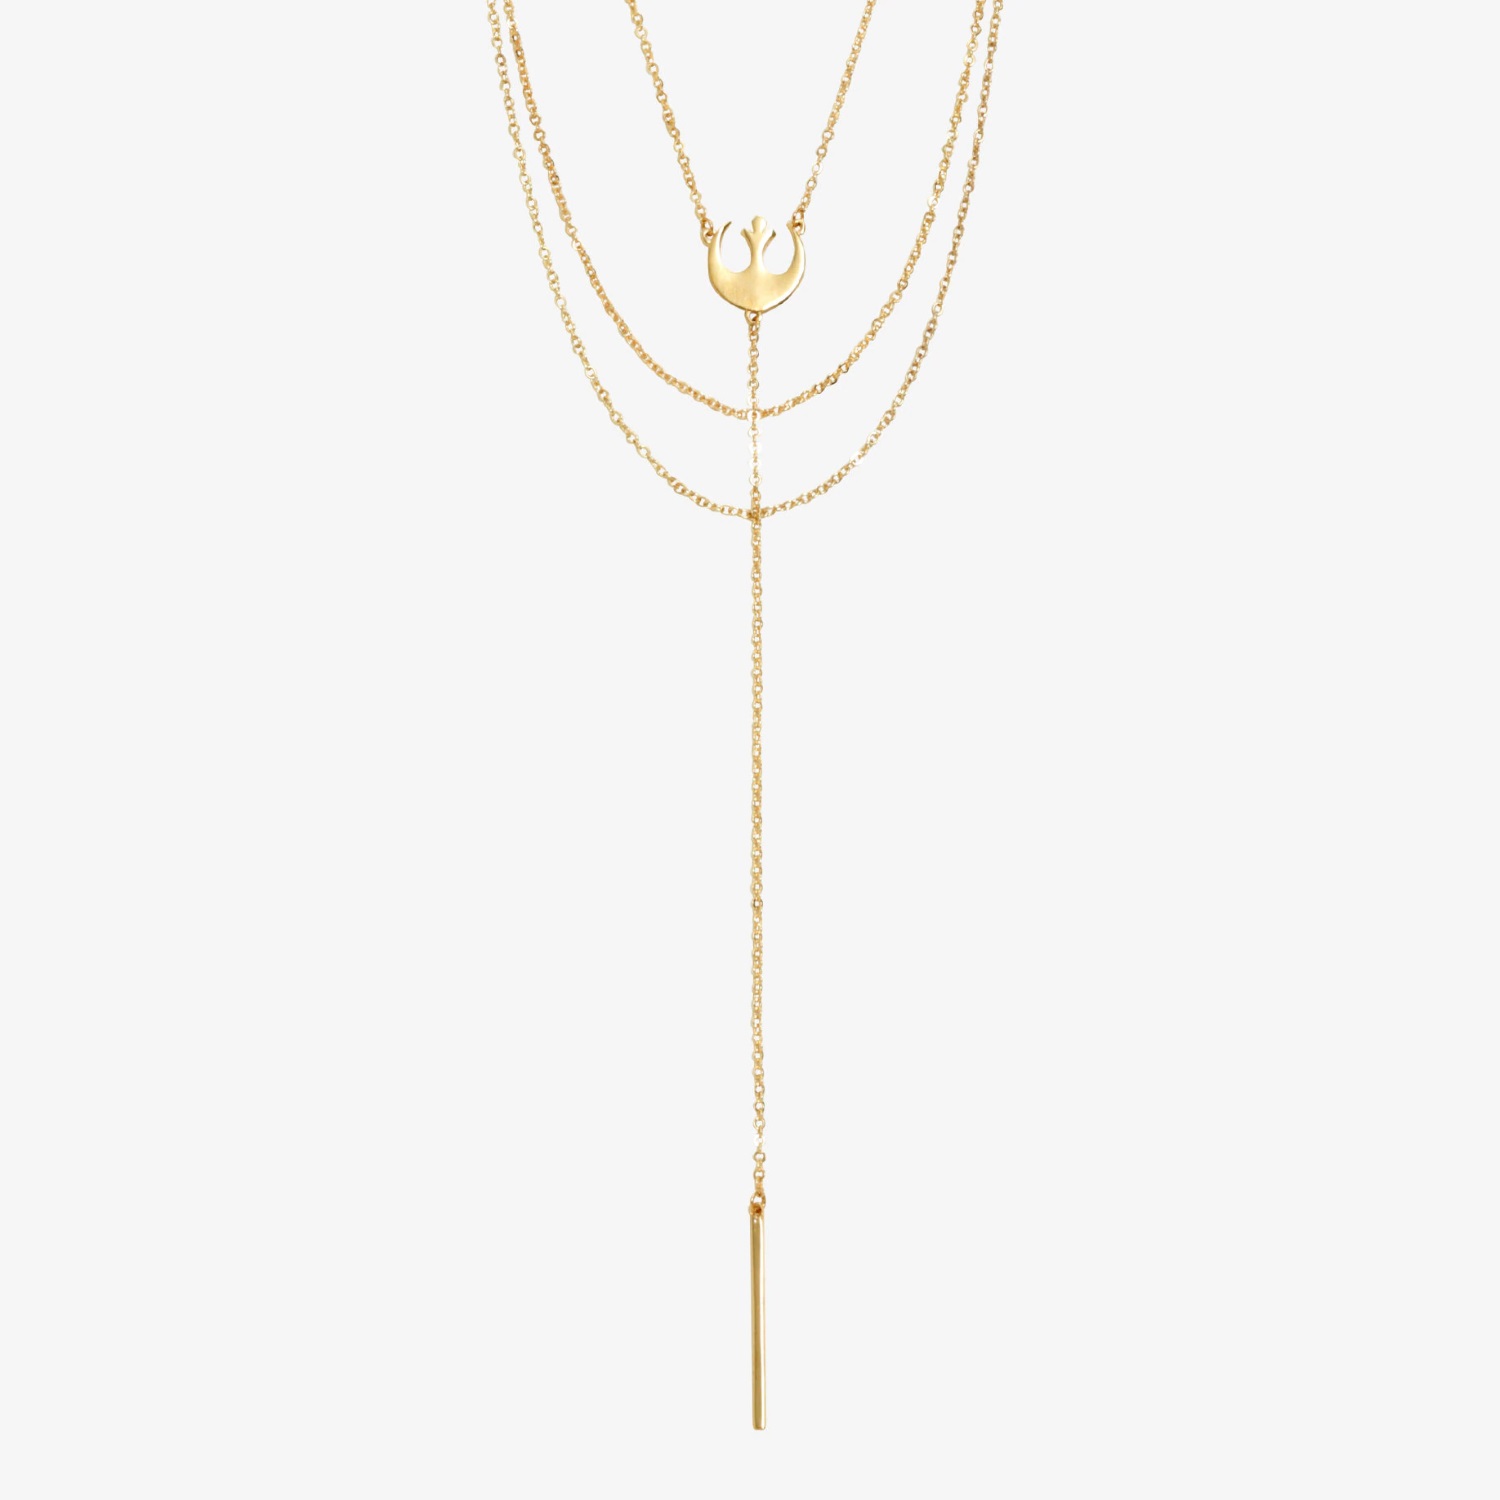 Loungefly x Star Wars Rebel Symbol Layered Necklace at Hot Topic